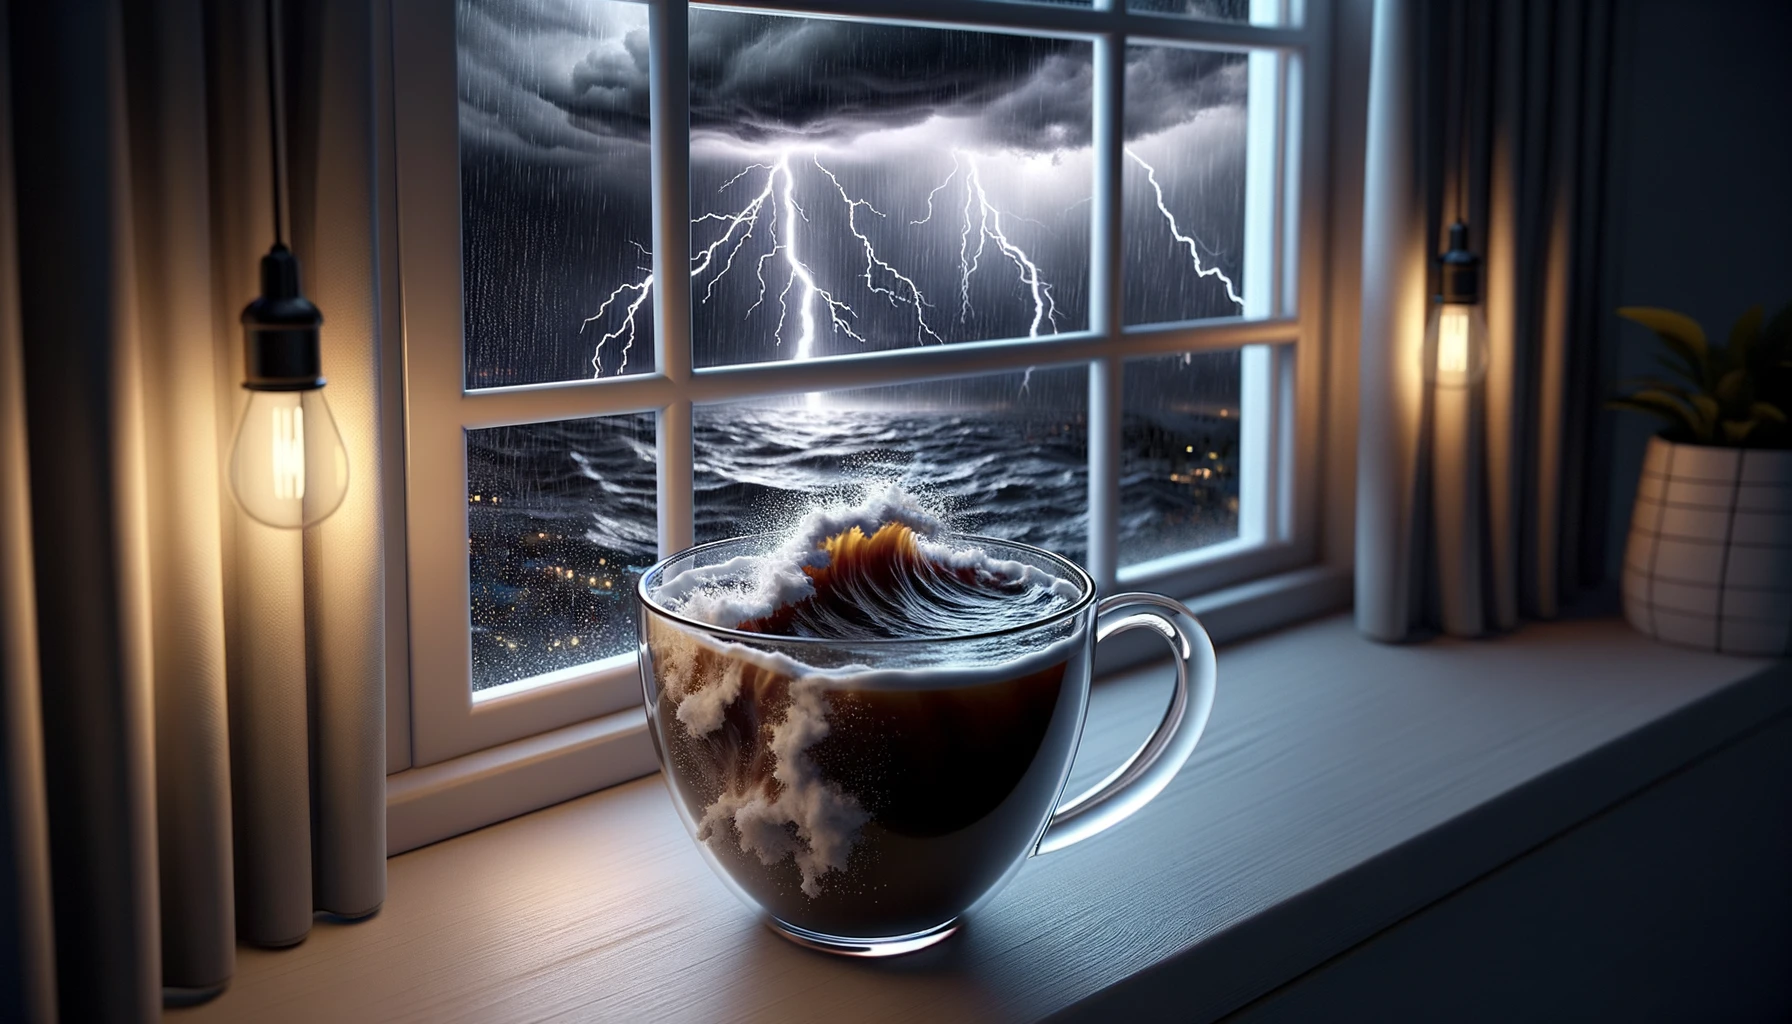 AI-generated image of a teacup with a violent wave inside of it. A storm brews from behind the window sill behind it.